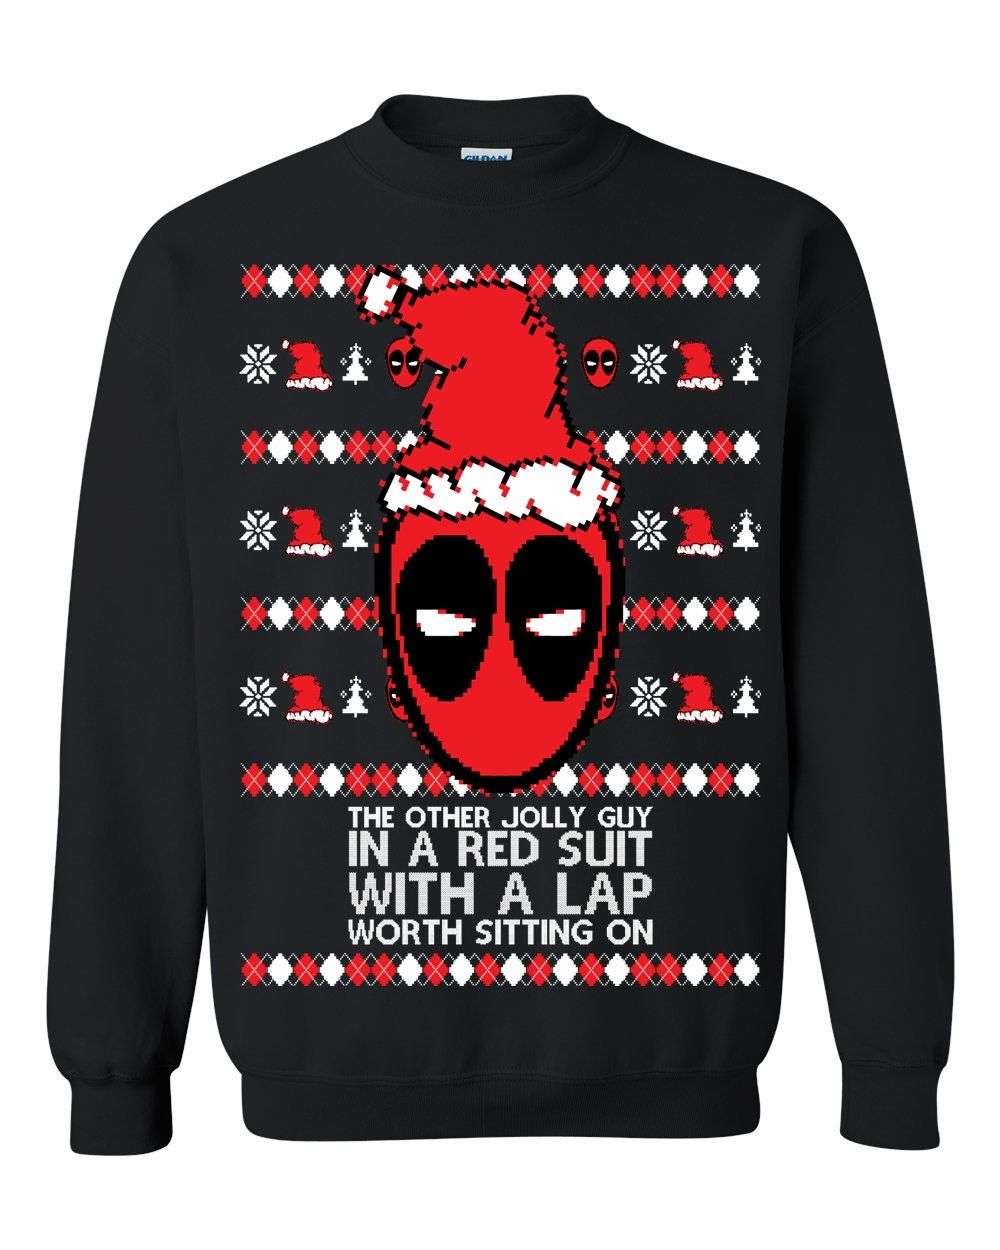 Deadpool The Other Jolly Guy in a Red Suit Unisex Xmas Sweater